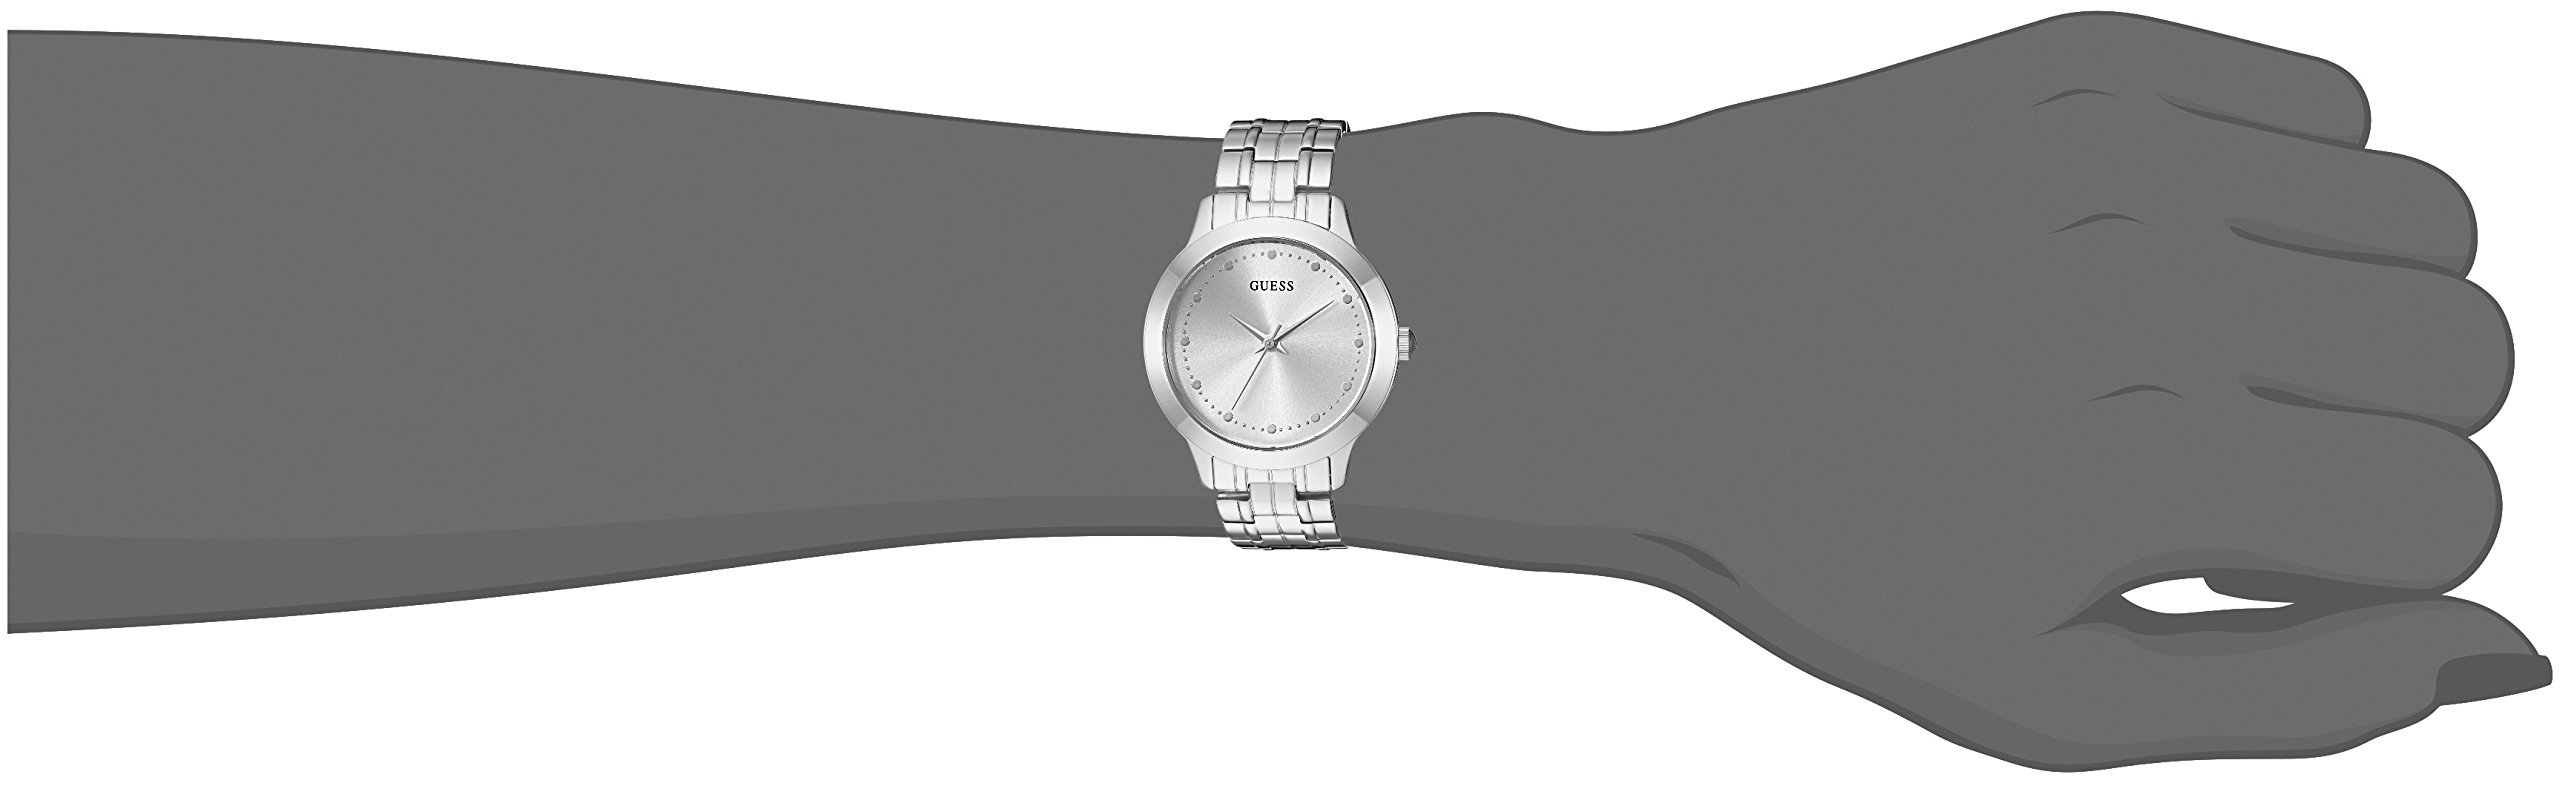 GUESS Classic Slim Stainless Steel Bracelet Watch